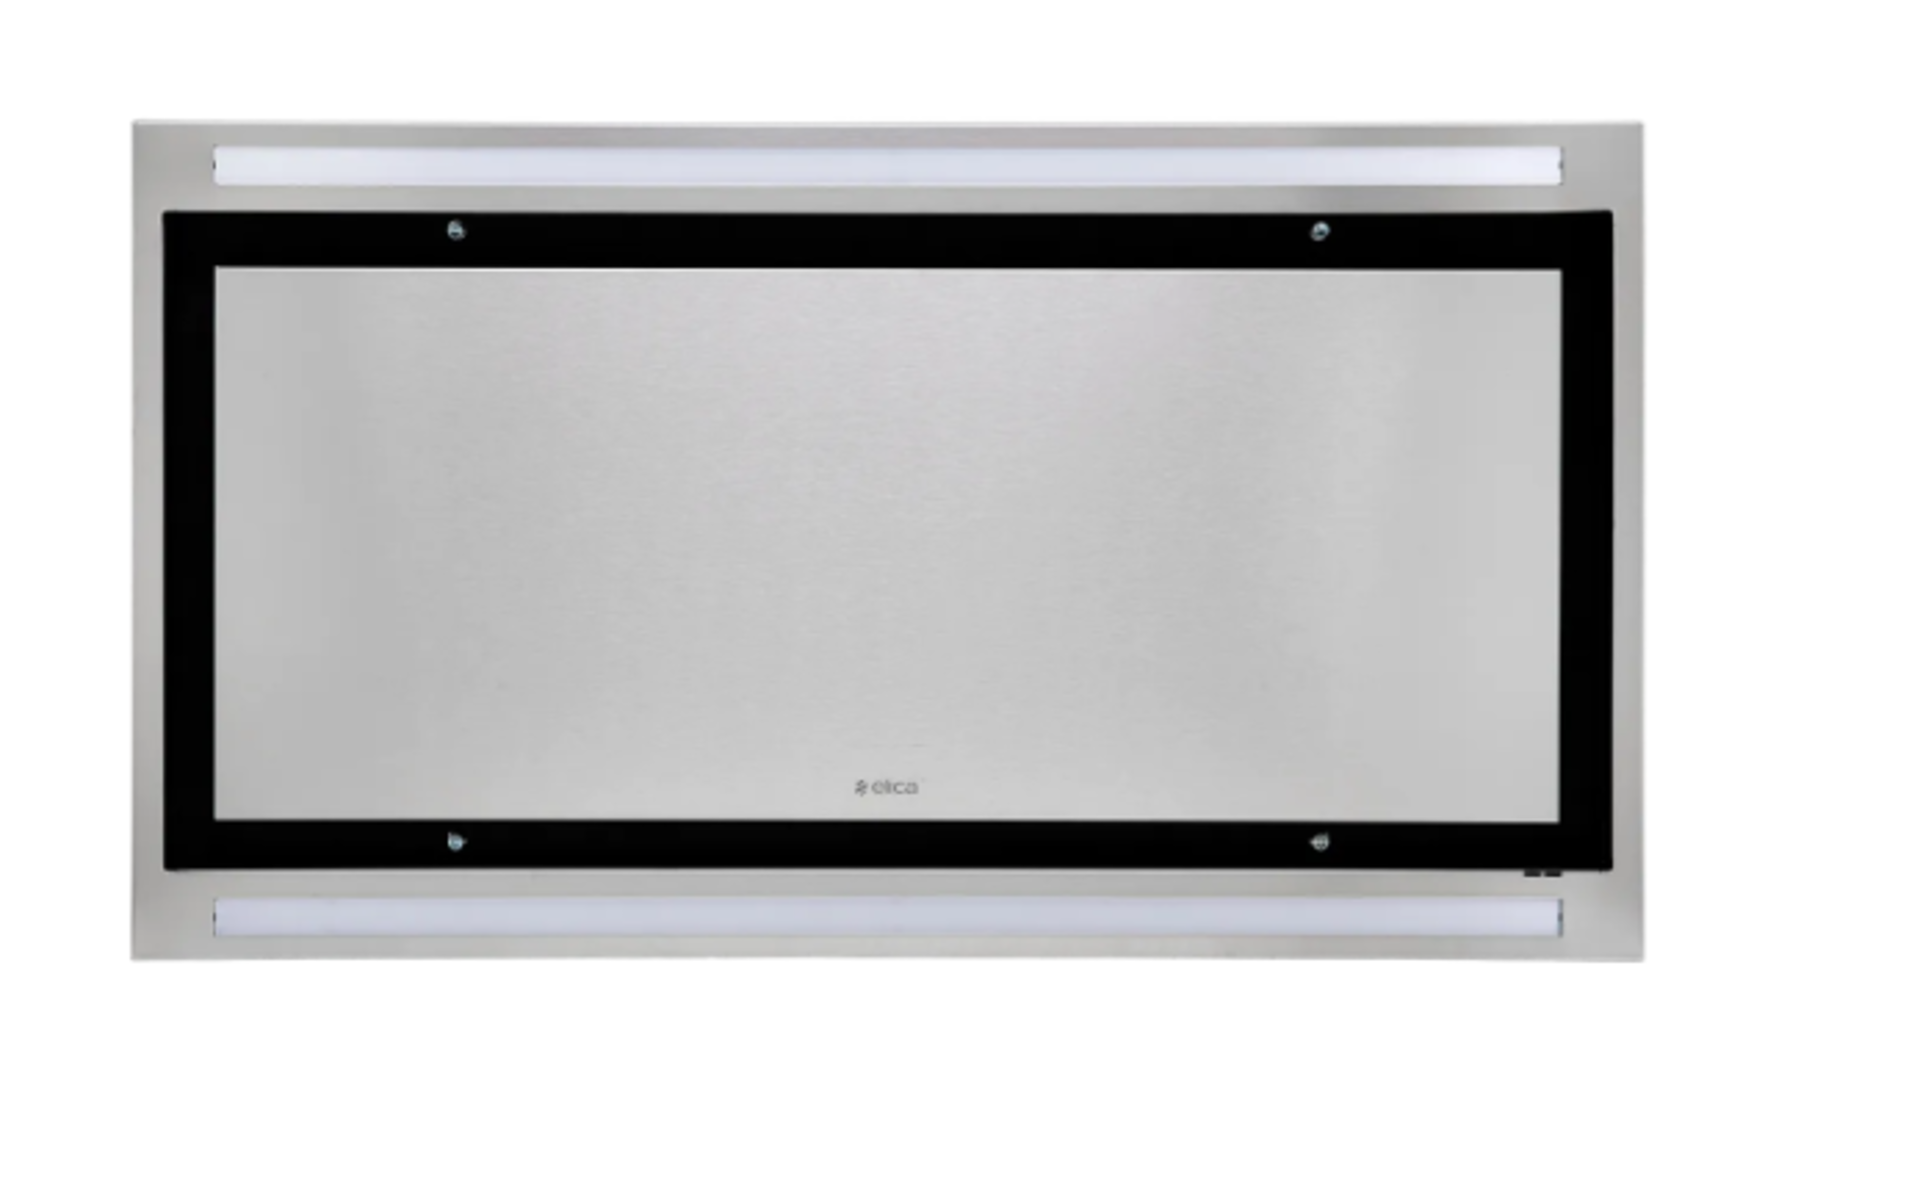 Elica CLOUD-SEVEN-DO 90 cm Ceiling Cooker Hood - Stainless Steel - For Ducted Ventilation - S2.